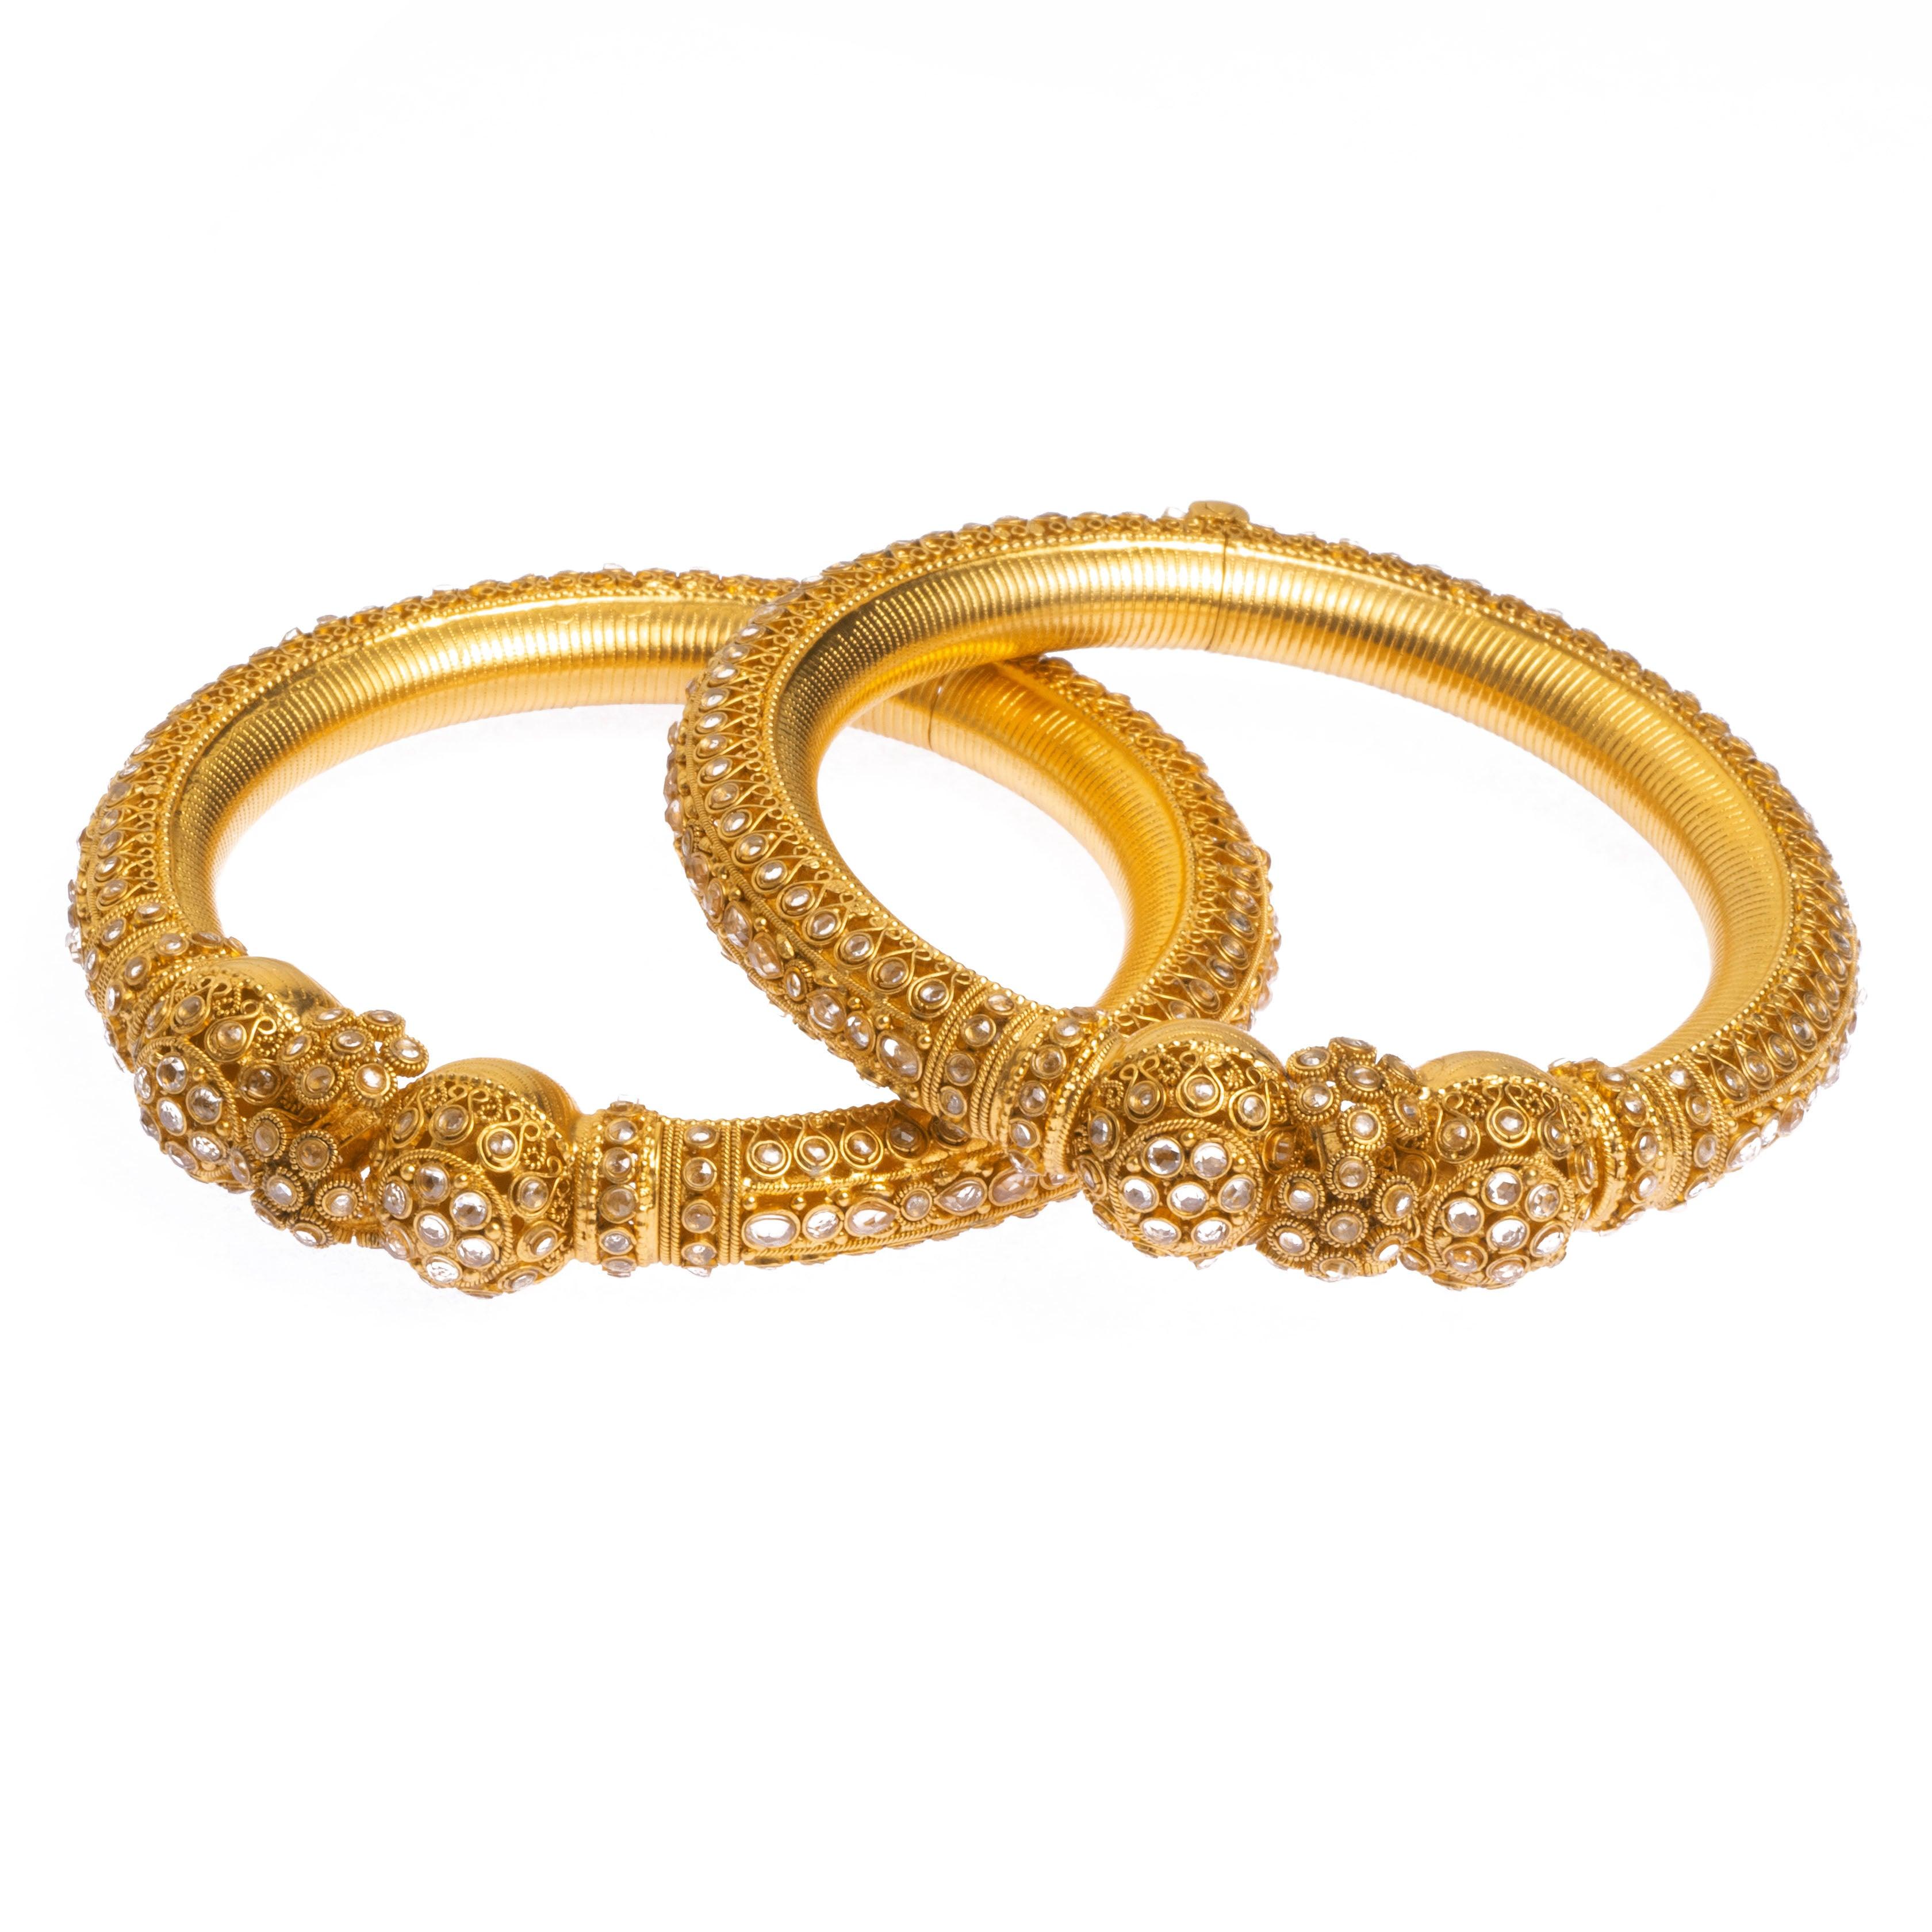 Pair of 22ct Gold Antiquated Look Openable Comfort Fit Bangles with Polki Style Stones B-8287 - Minar Jewellers